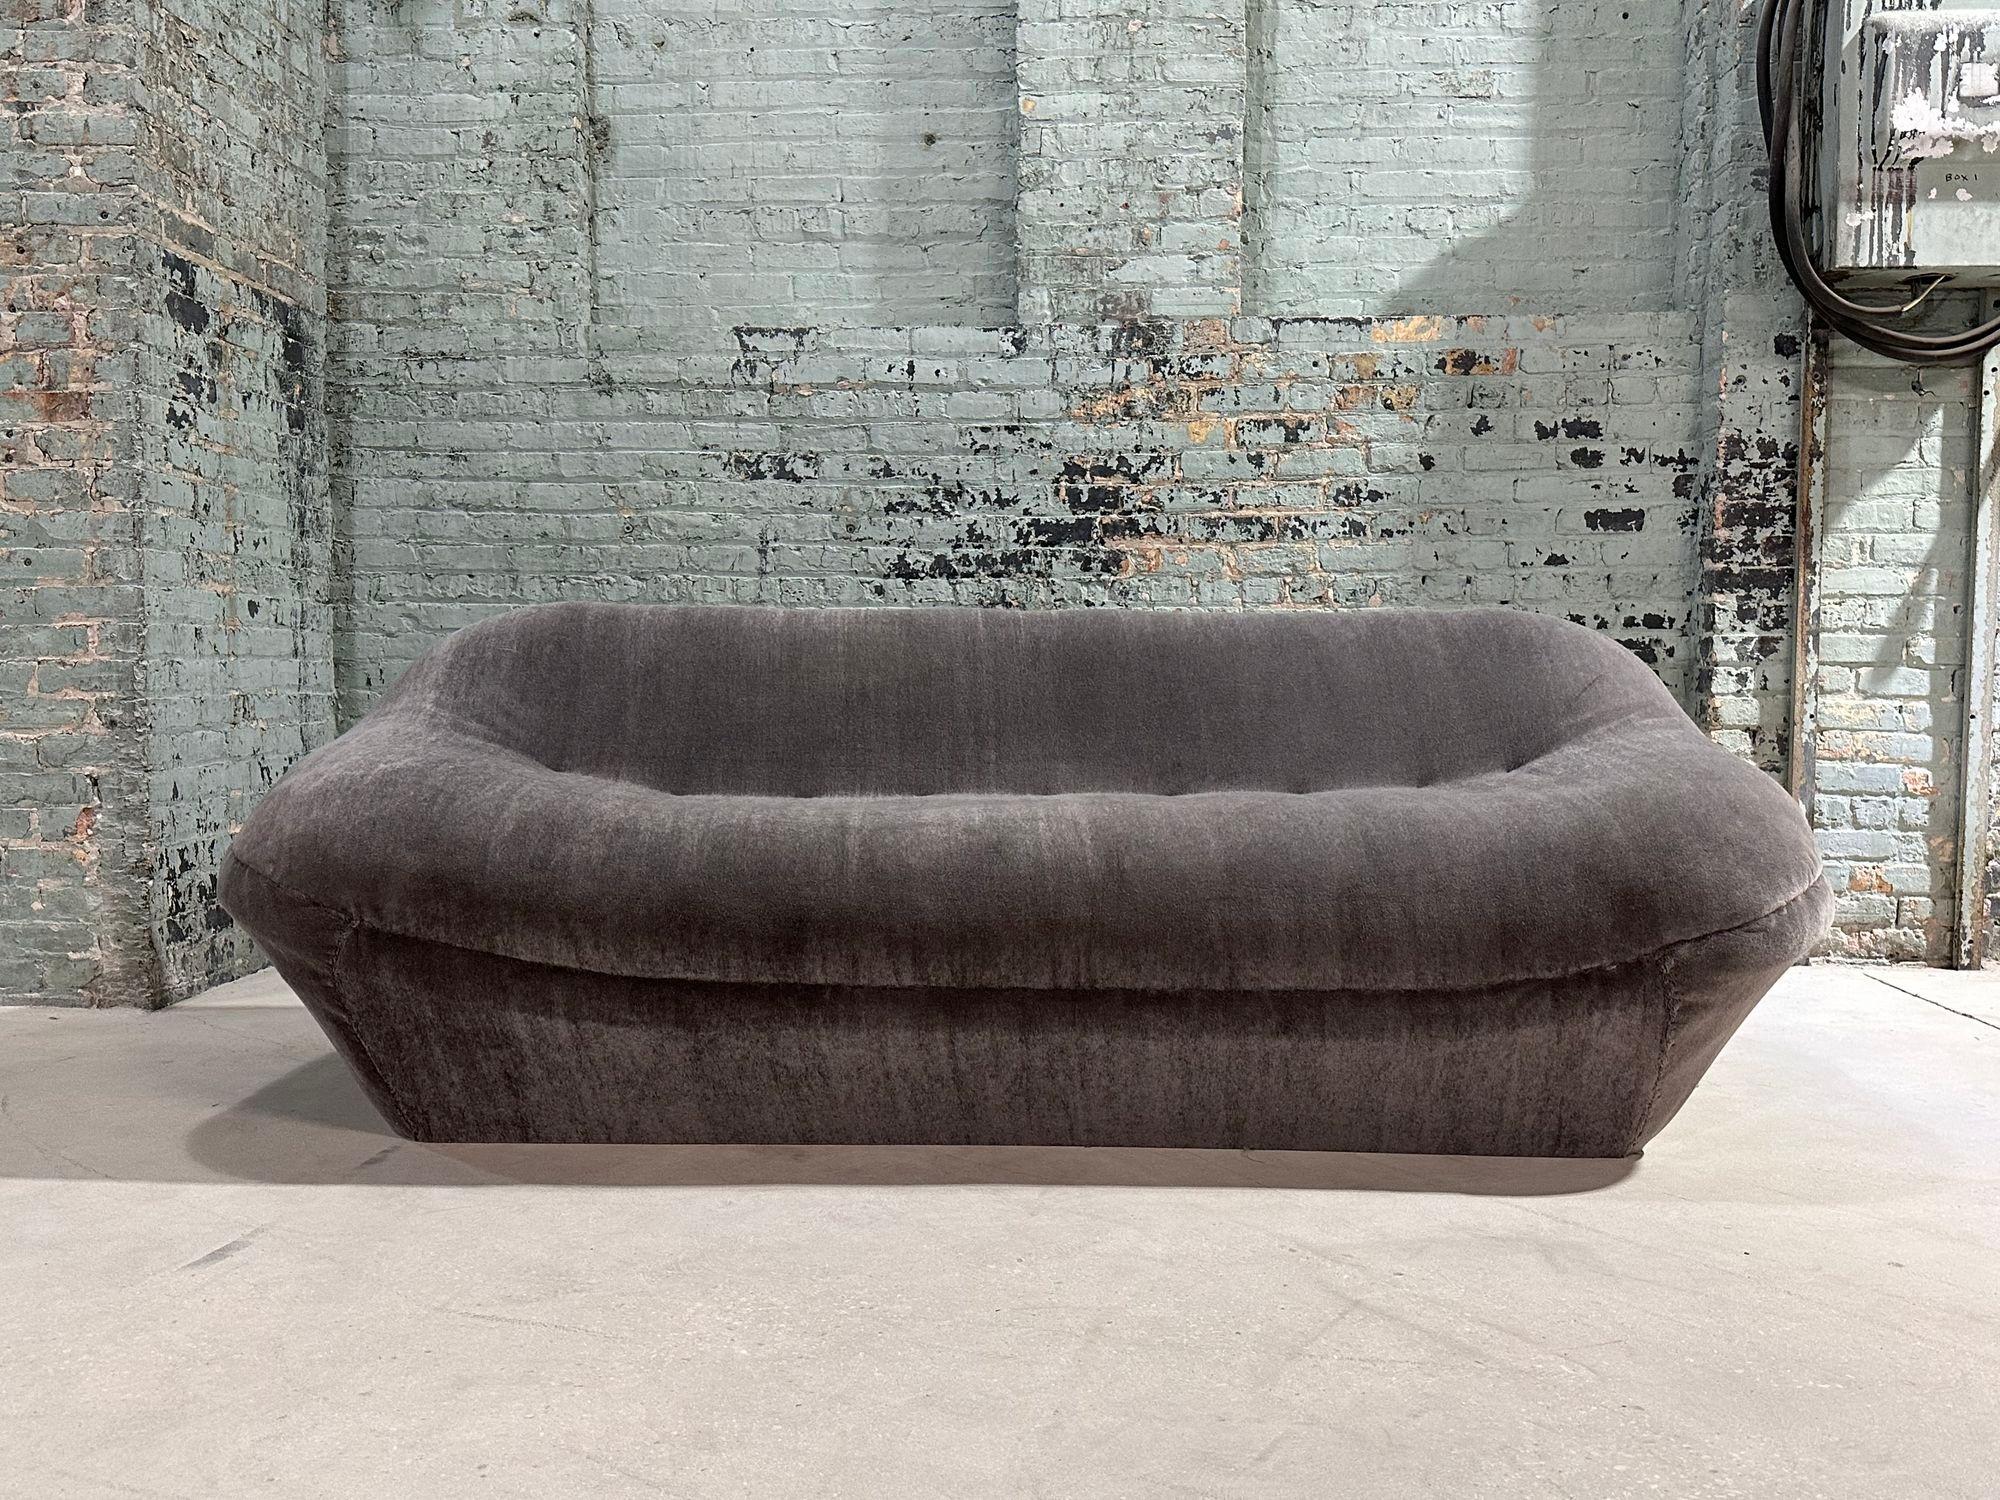 Post Modern Sculptural Pouf Sofa, 1980.  Newly upholstered in ultra plush mohair
A post-modern sculptural pouf sofa is a unique and artistic piece of furniture that combines elements of both sculpture and seating. It embodies the aesthetic